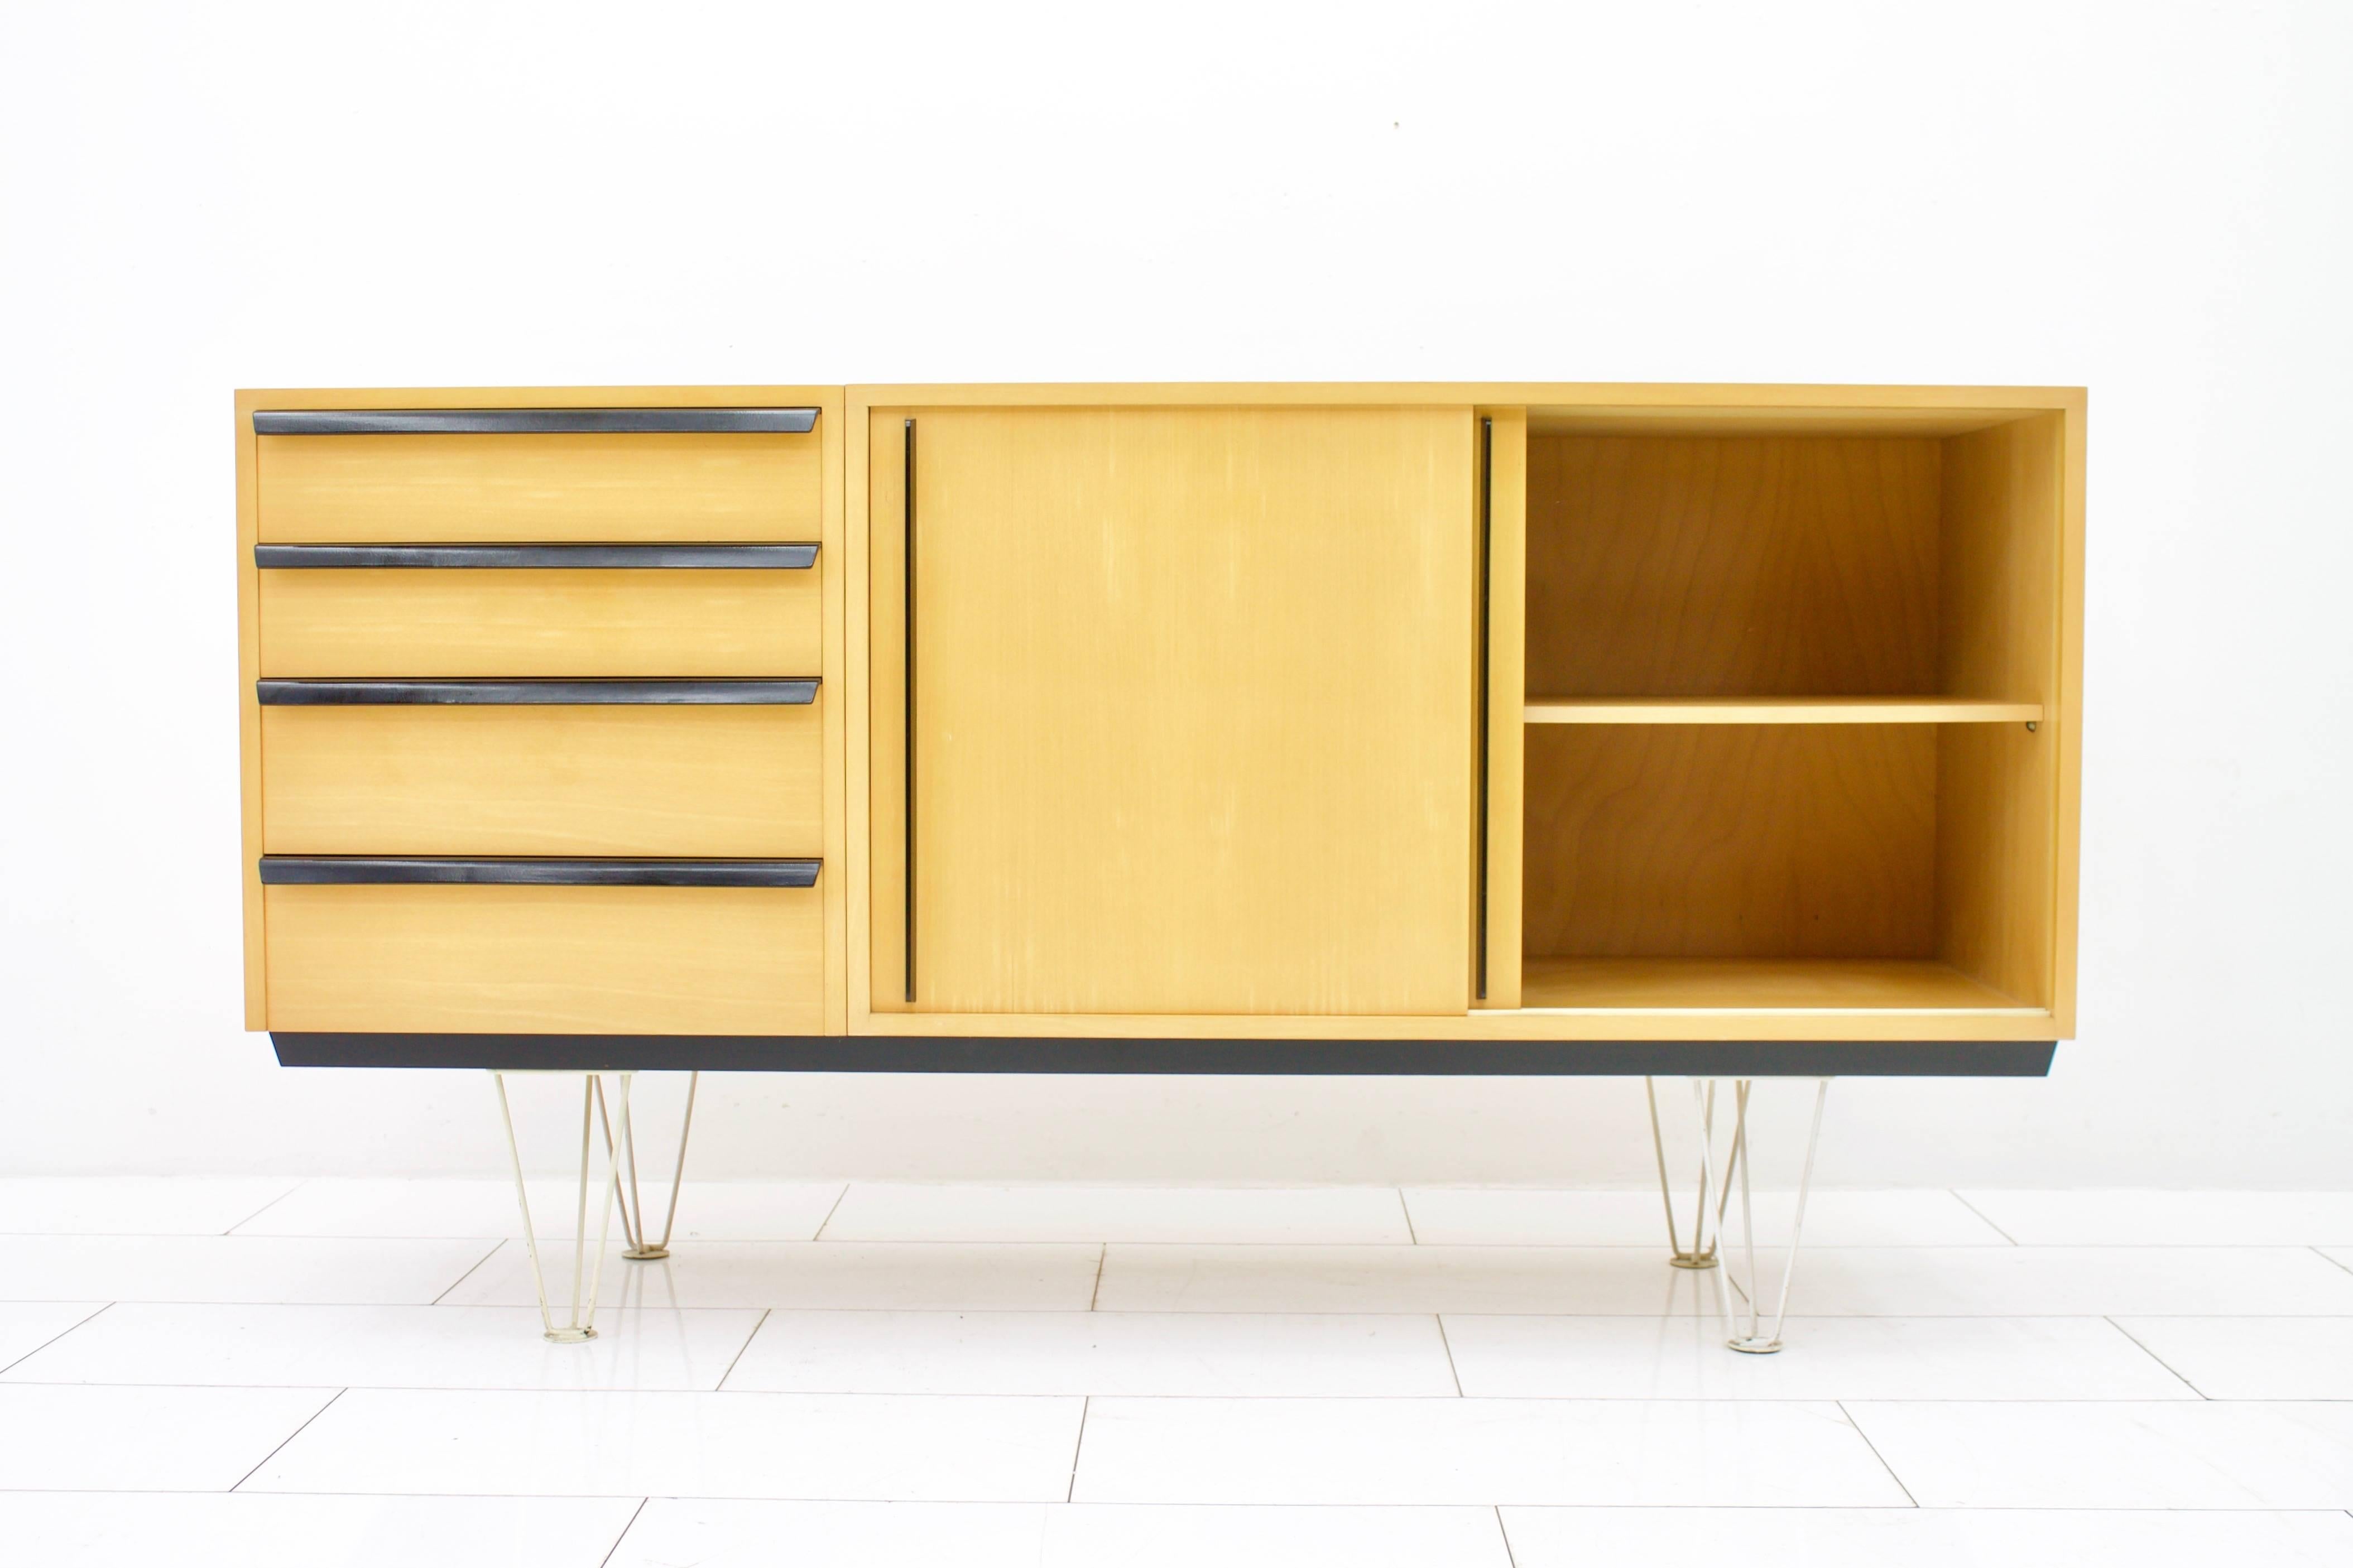 Rare sideboard by Alfred Altherr for Freba, Switzerland, 1955. Cherrywood and black lacquered wood grips and white metal legs.
Measures: W 165 cm, H 87.5 cm, T 48 cm.

Very good condition.

Worldwide shipping.